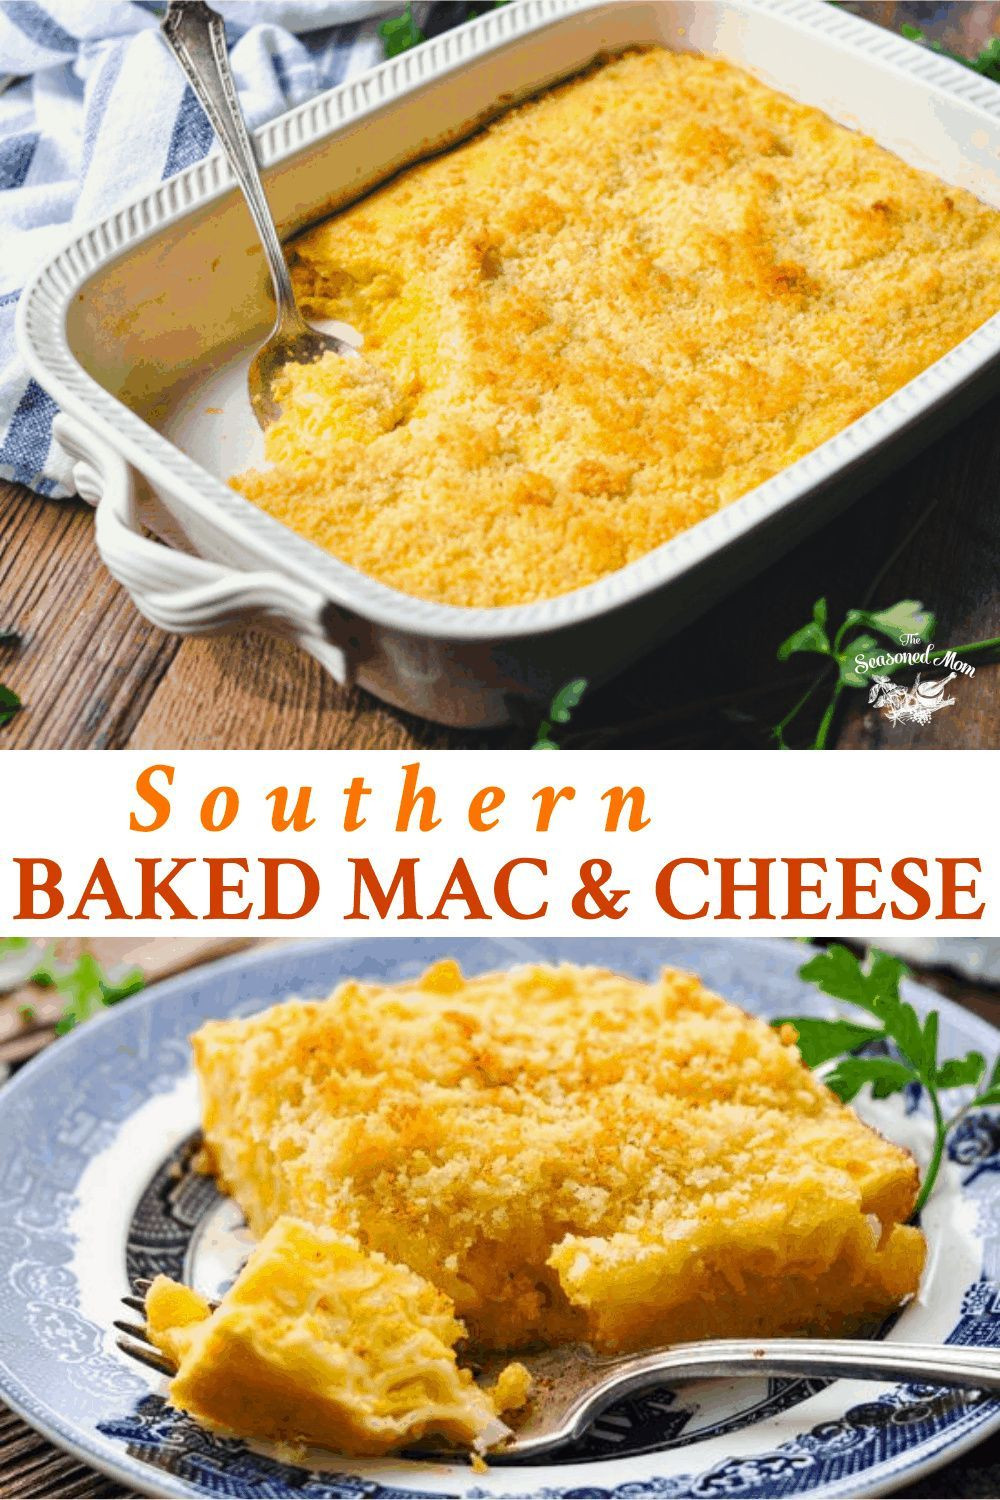 Southern Baked Macaroni And Cheese With Bread Crumbs
 Southern Baked Macaroni and Cheese Recipe